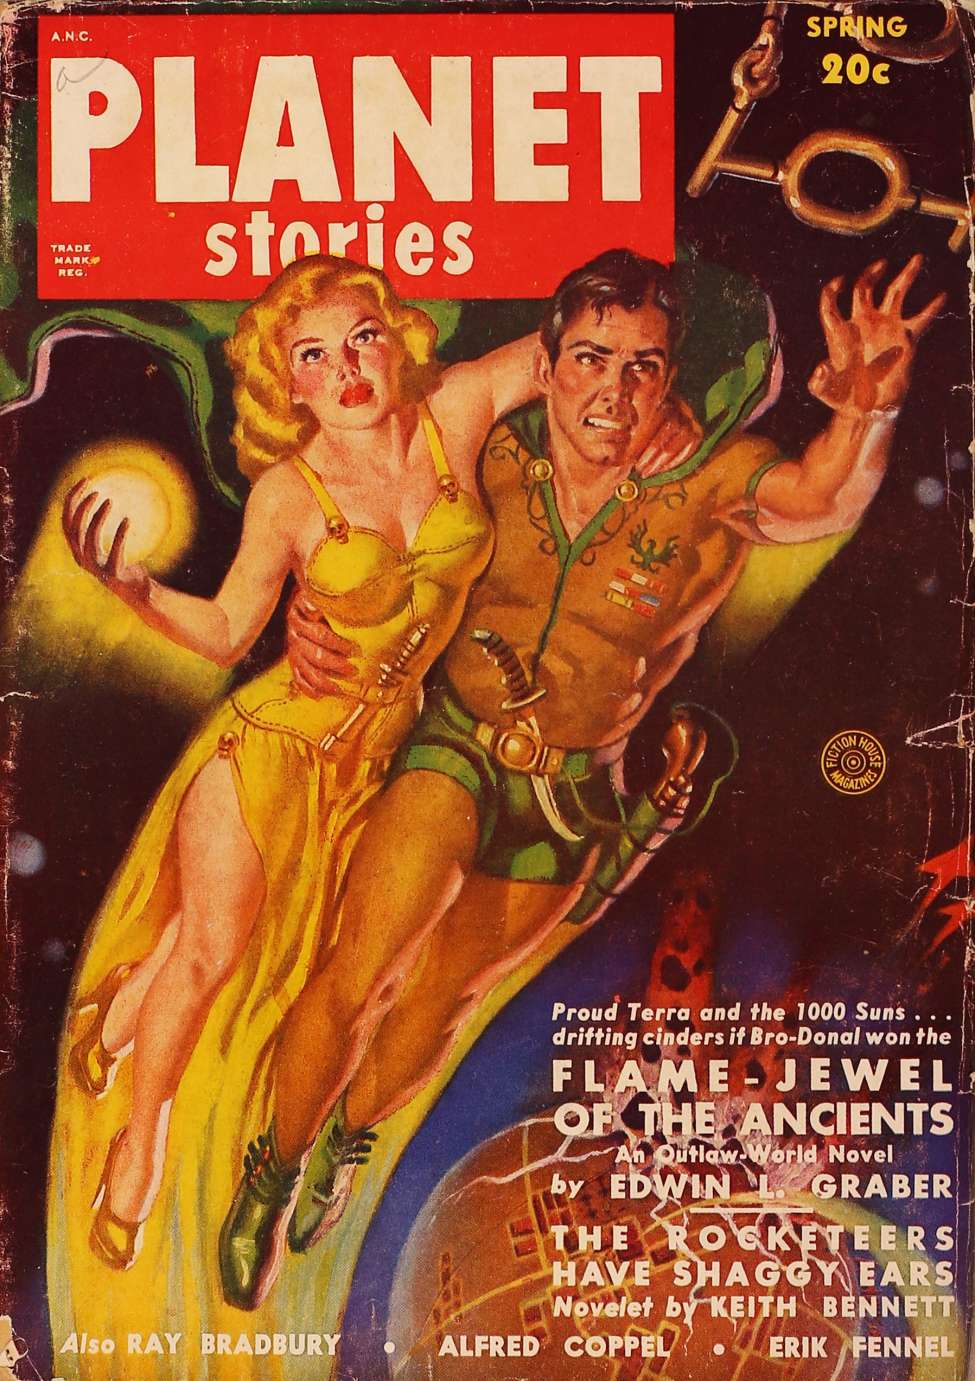 Comic Book Cover For Planet Stories v4 6 - Flame-Jewel of the Ancients - Edwin L. Graber